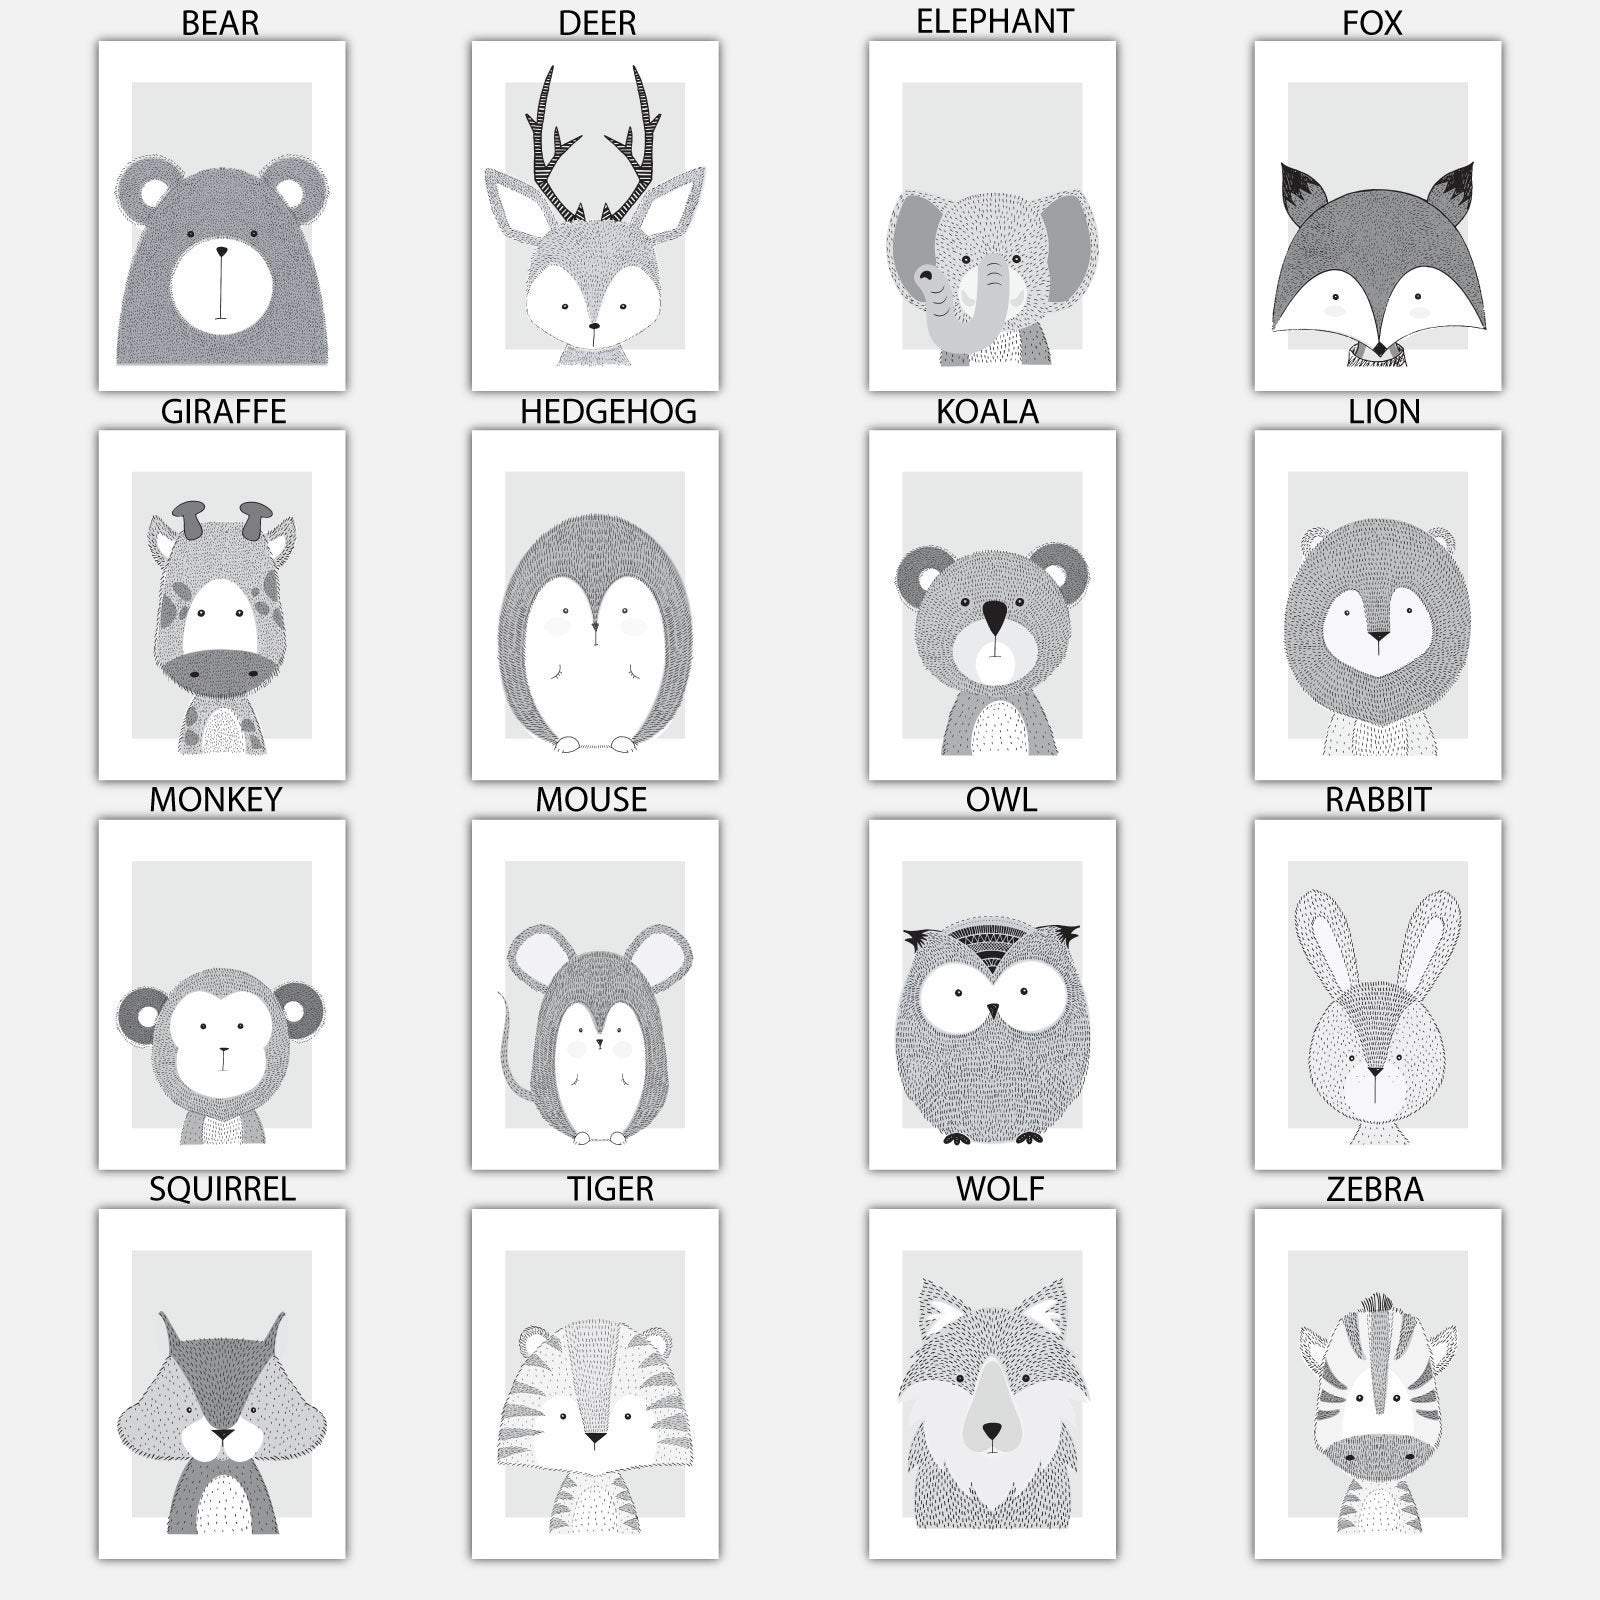 NURSERY Set CHOOSE any 5 Colours and Animals Create your own UNIQUE Gallery Wall Art Prints Original Scandinavian Style Posters Artwork